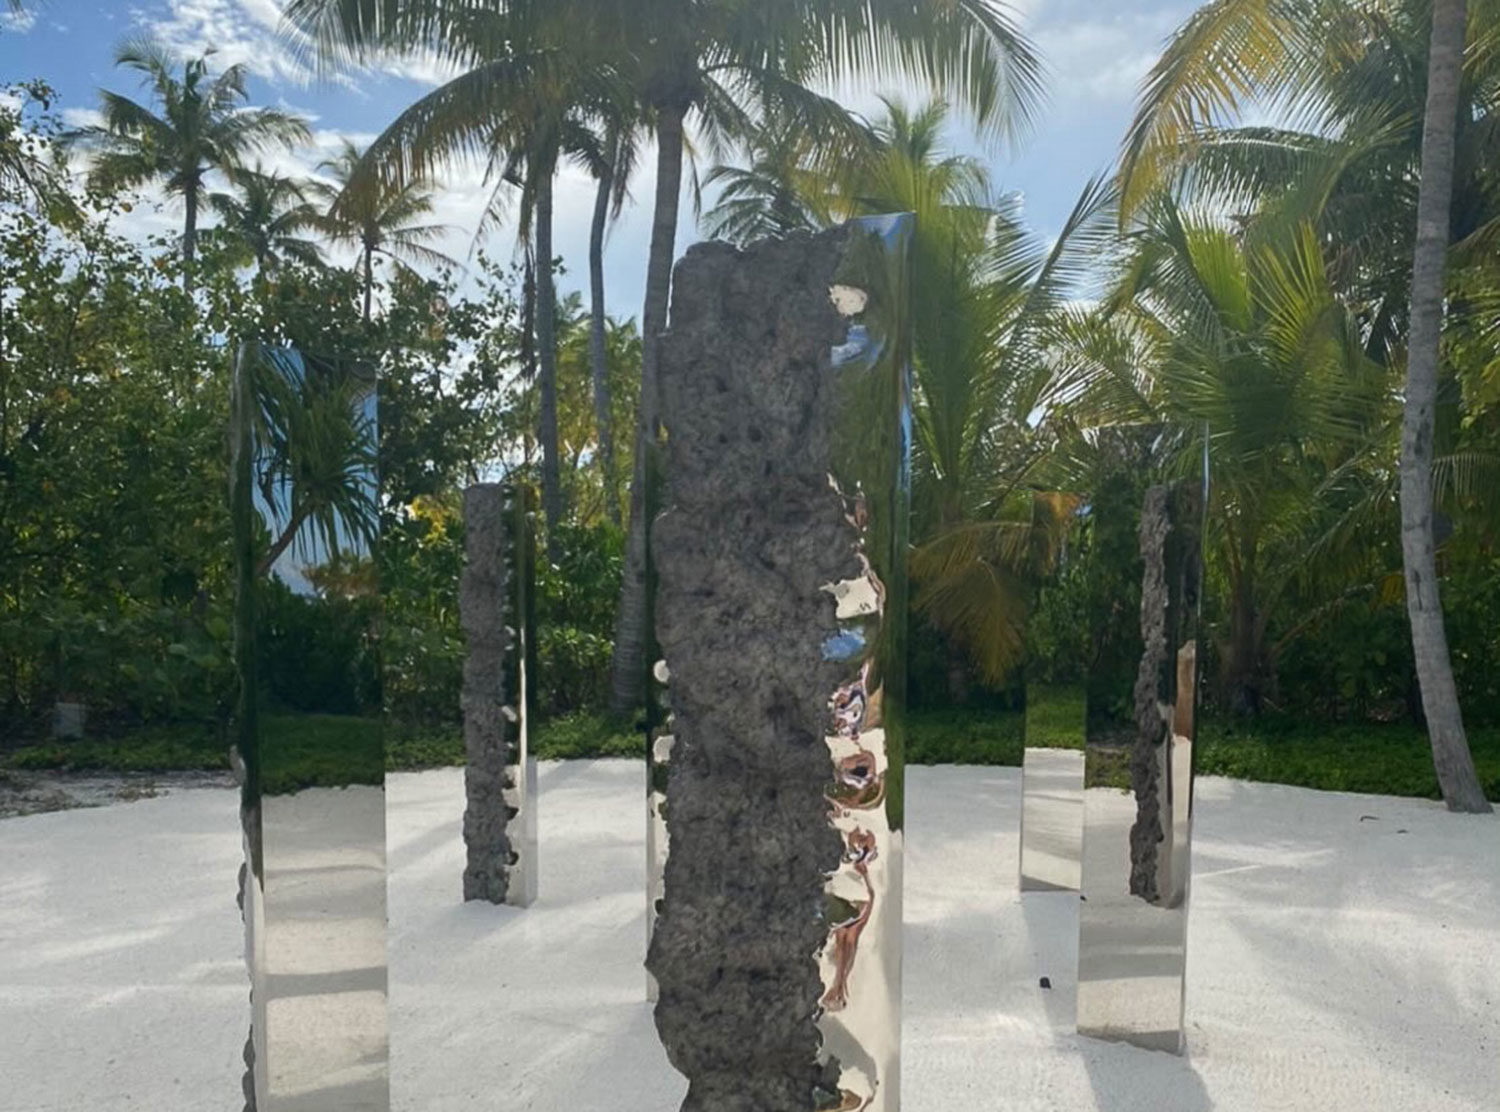 Patina Maldives, Fari Islands “Synthesis Monoliths” (2020) by Hongjie Yang — discover different sides of you